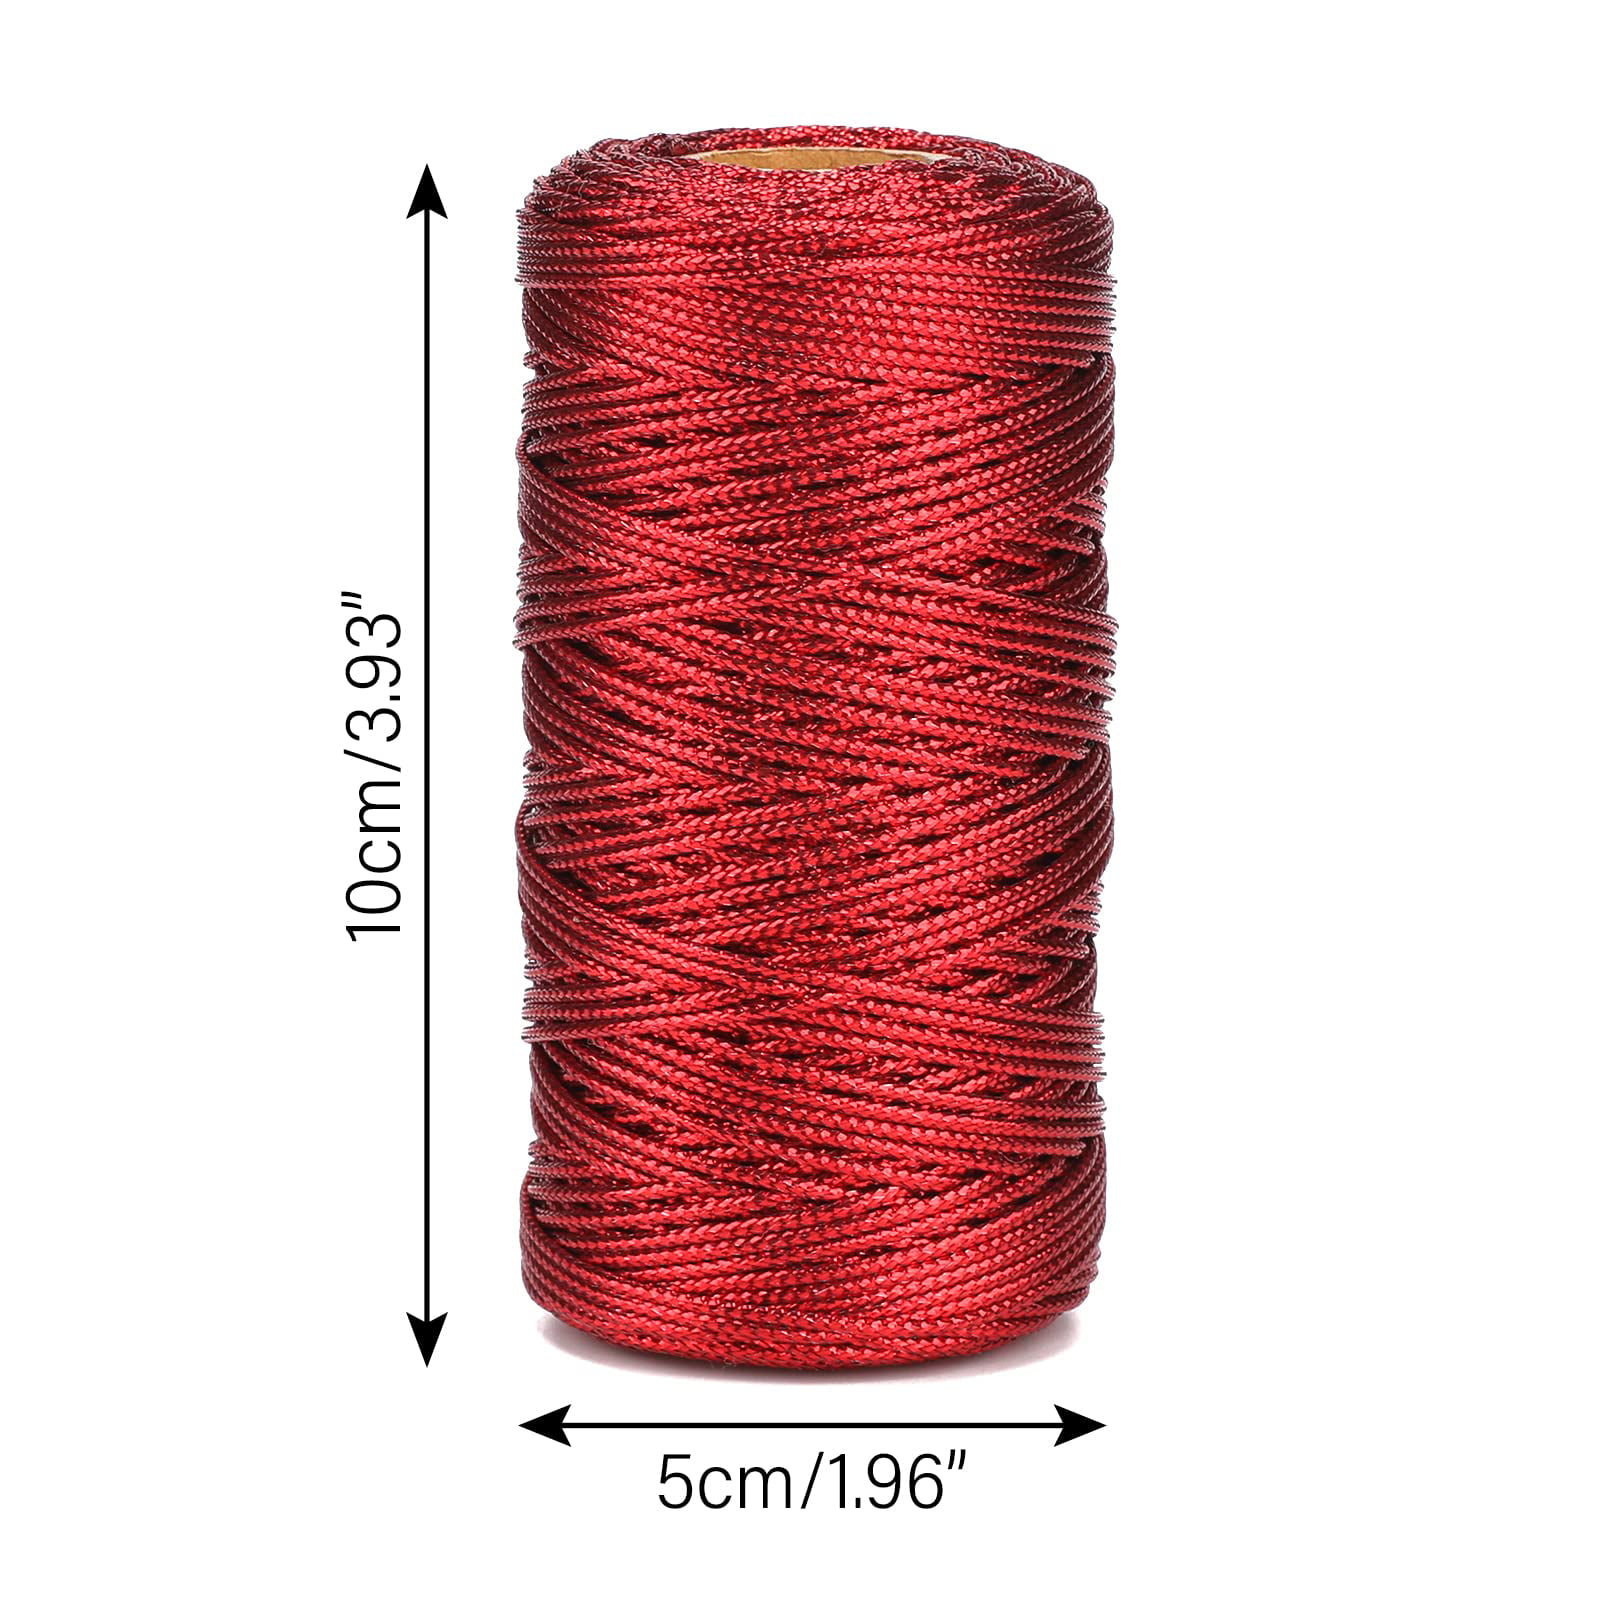 100M/110 Yards Decorative Metallic Bakers Twine Red String Cord Christmas  Craft Twine for DIY Crafts & Gift Wrapping